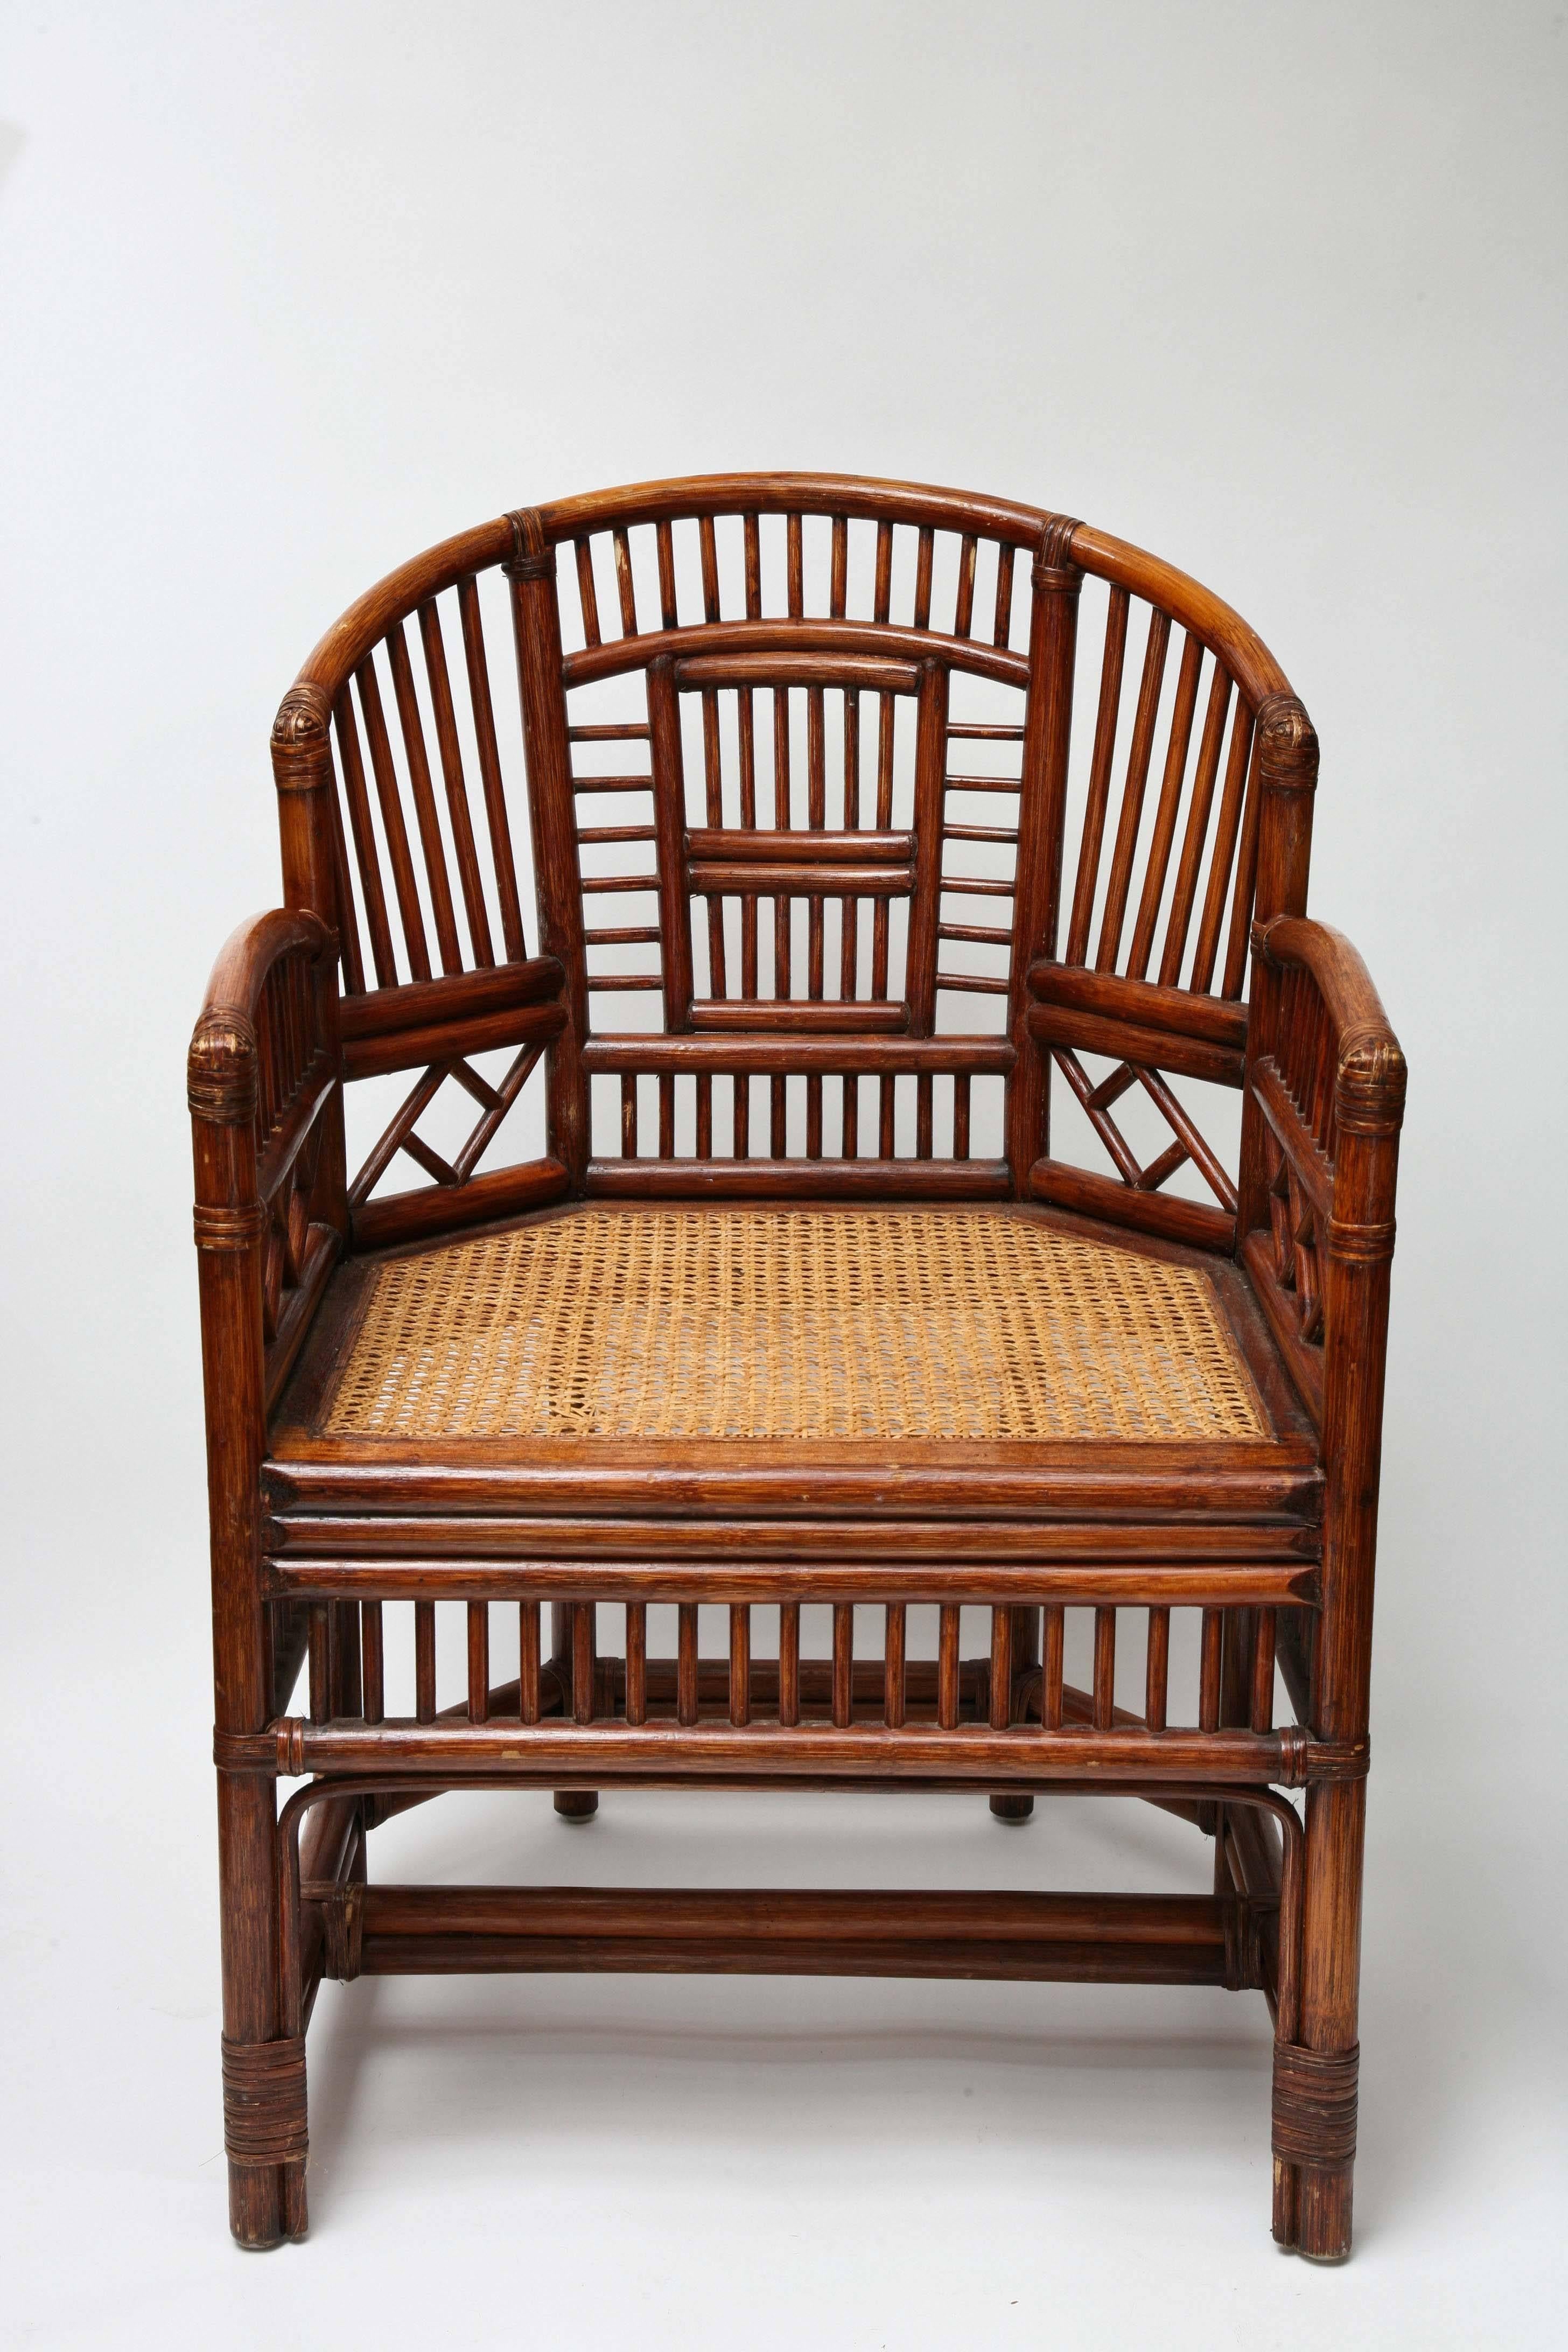 A pair of English Chippendale style chairs with caned seat.